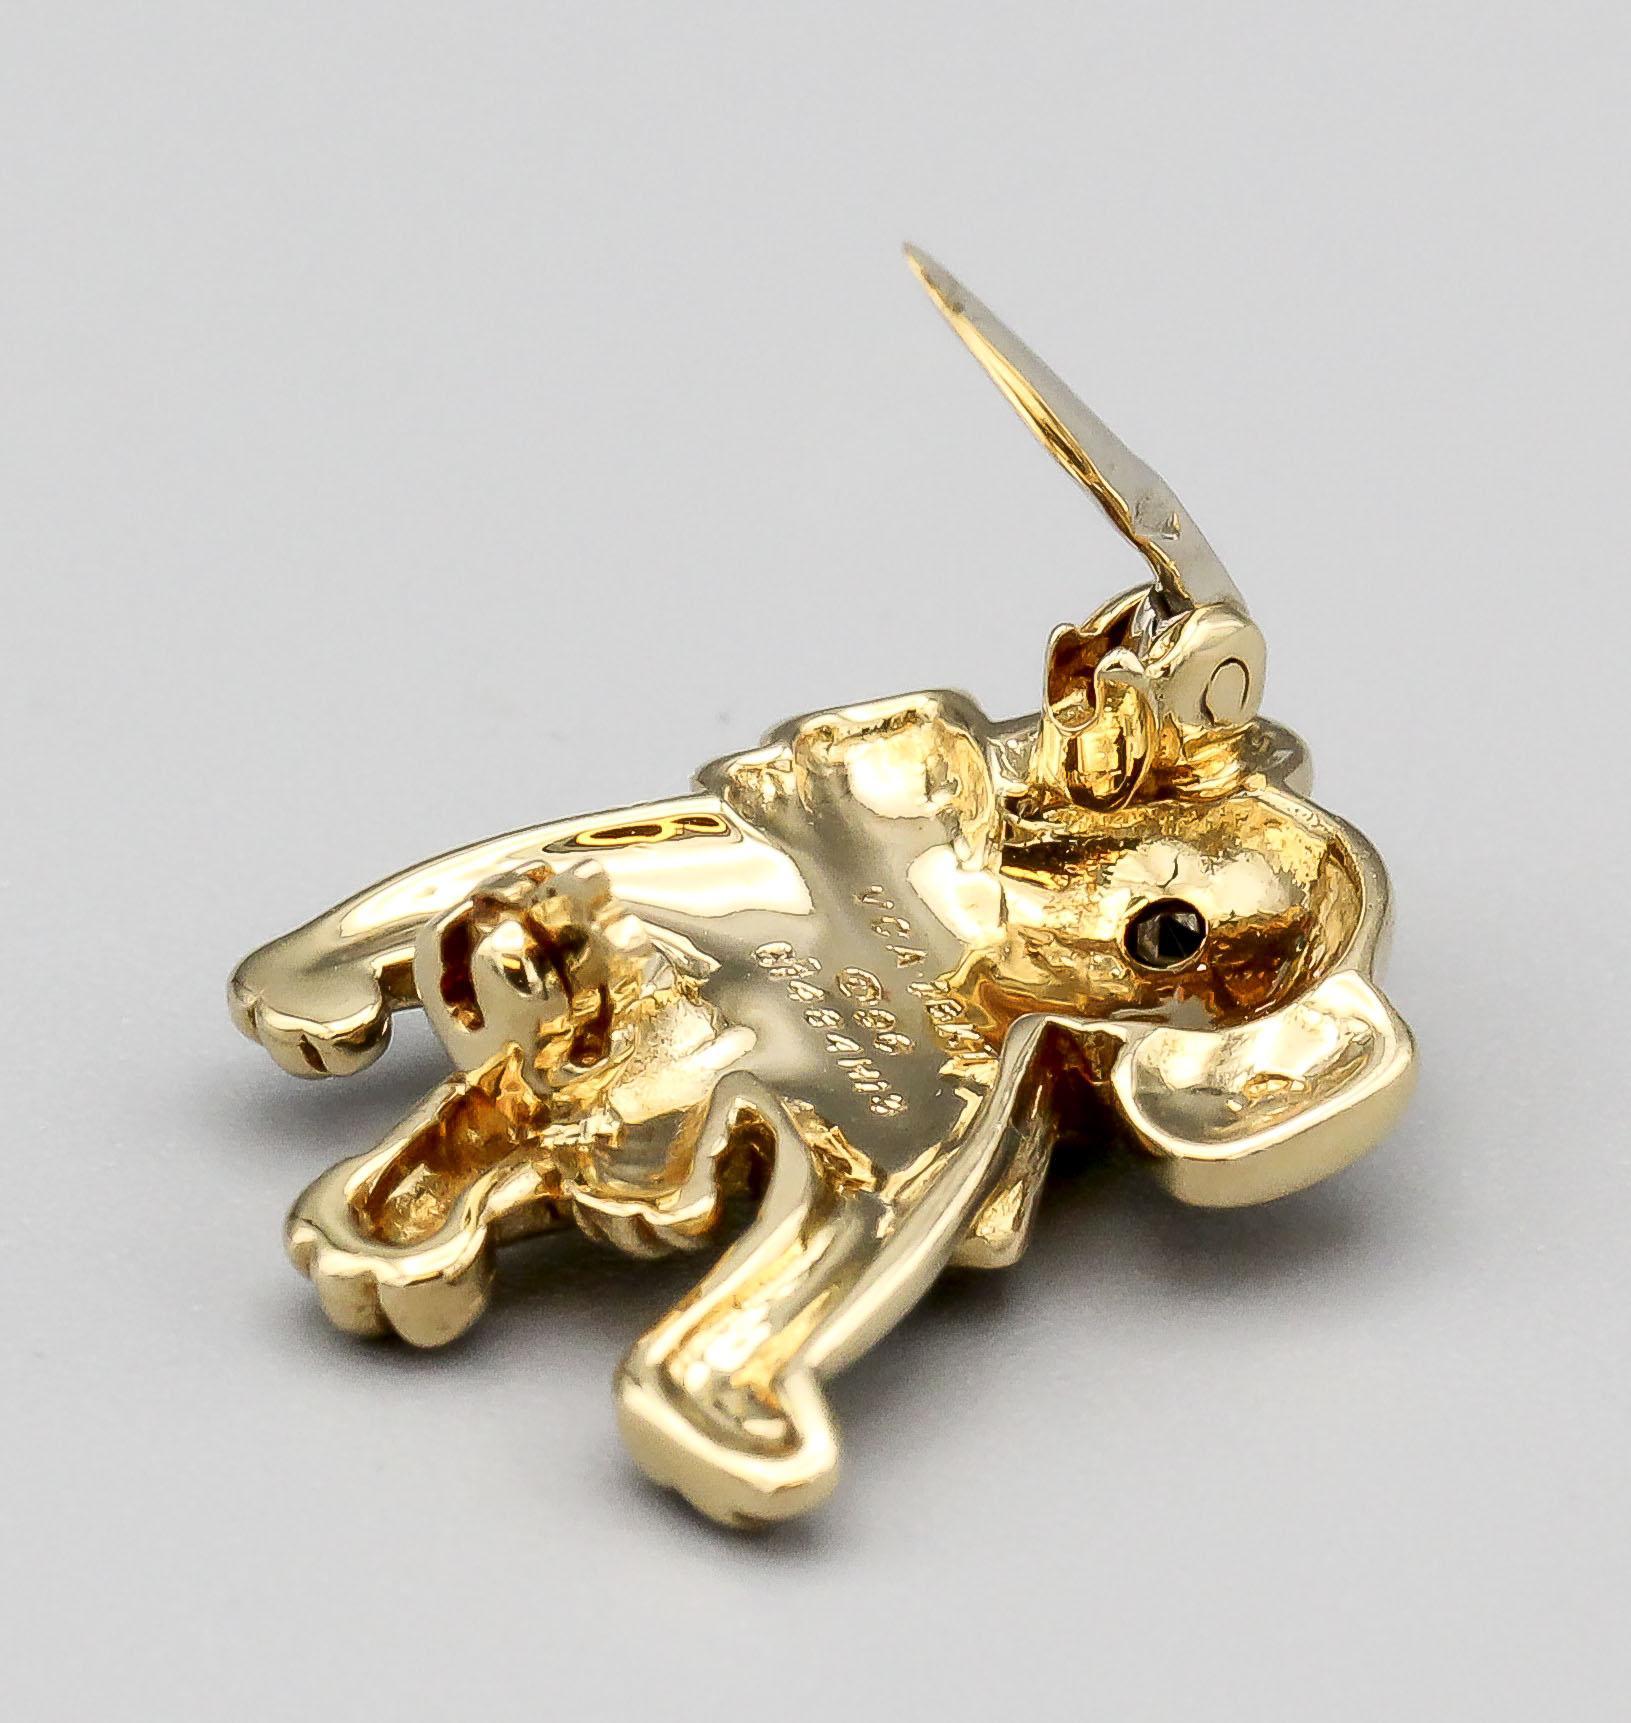 Van Cleef & Arpels Onyx 18k Gold Dog with Newspaper Brooch In Good Condition For Sale In Bellmore, NY